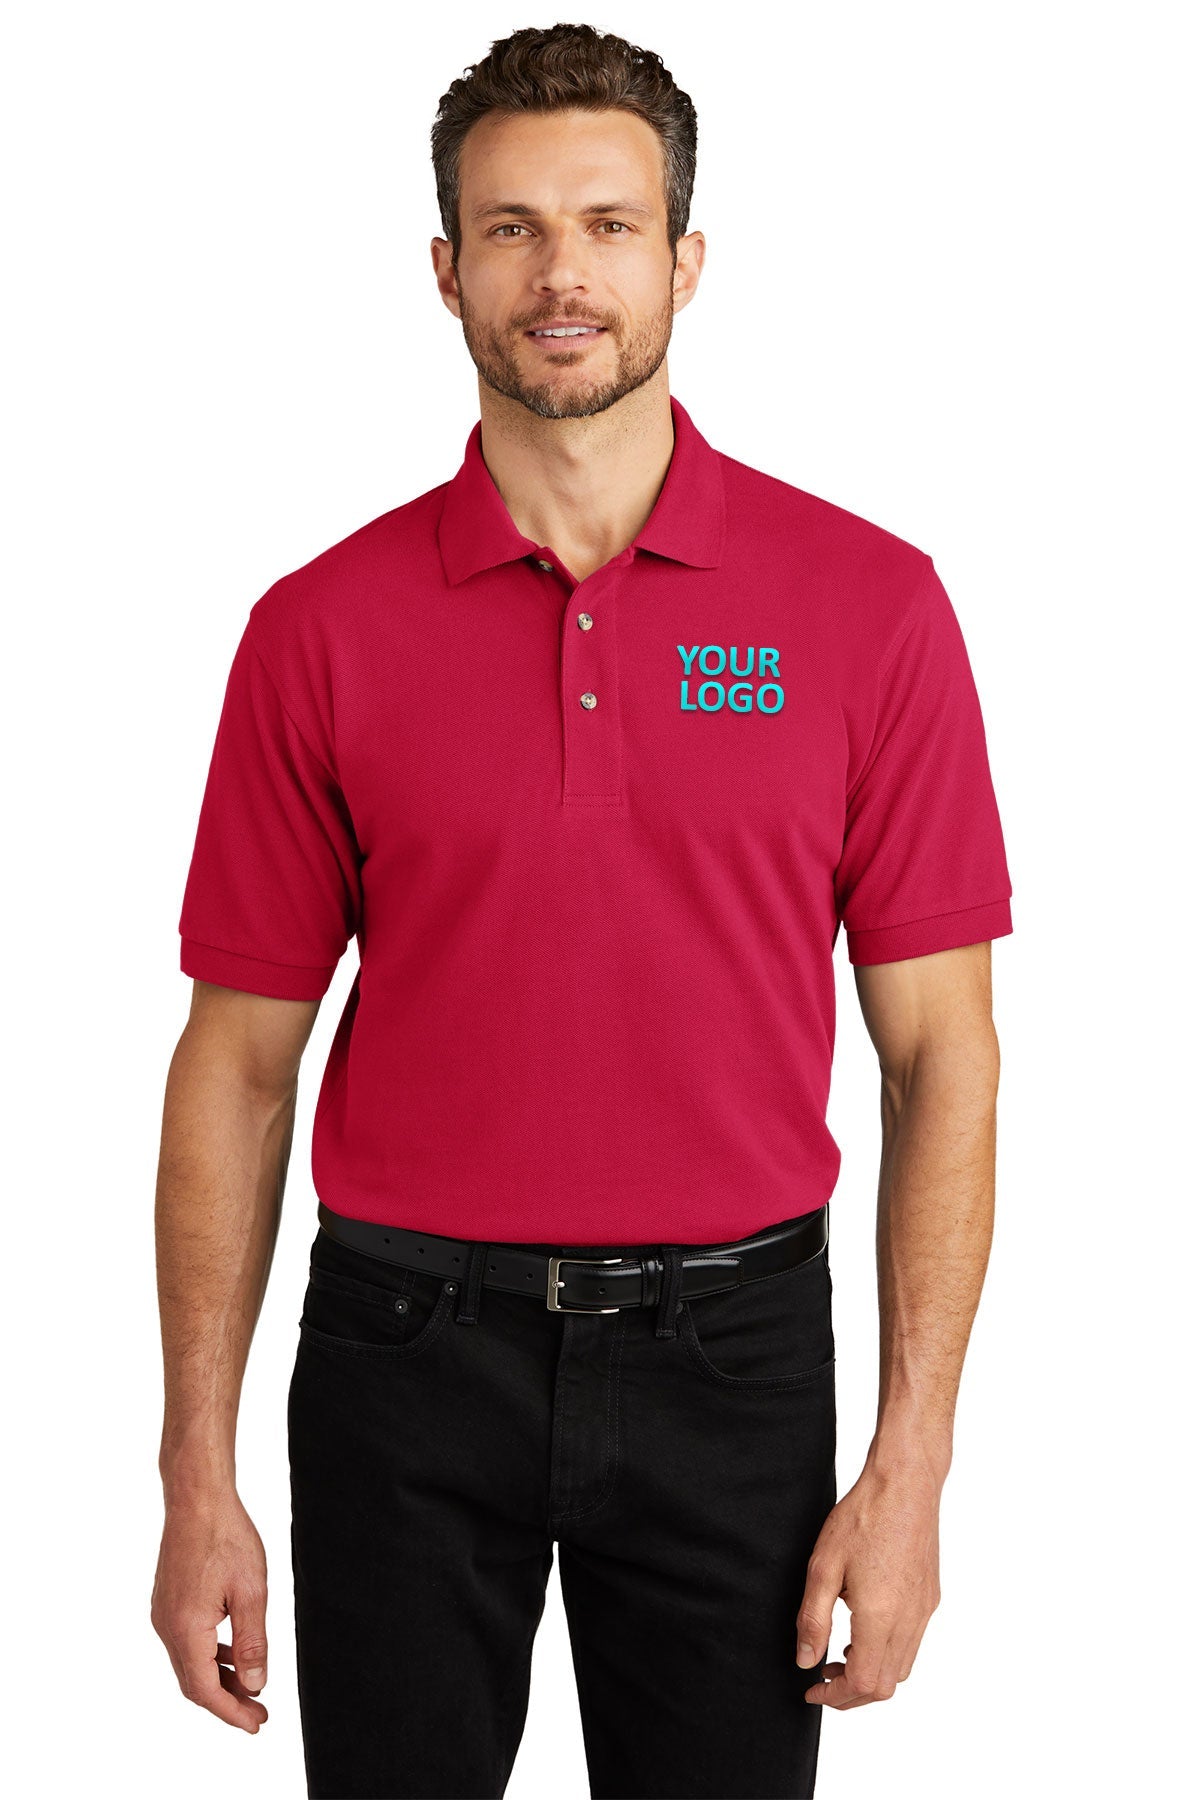 port authority red k420 polo shirts with company logo